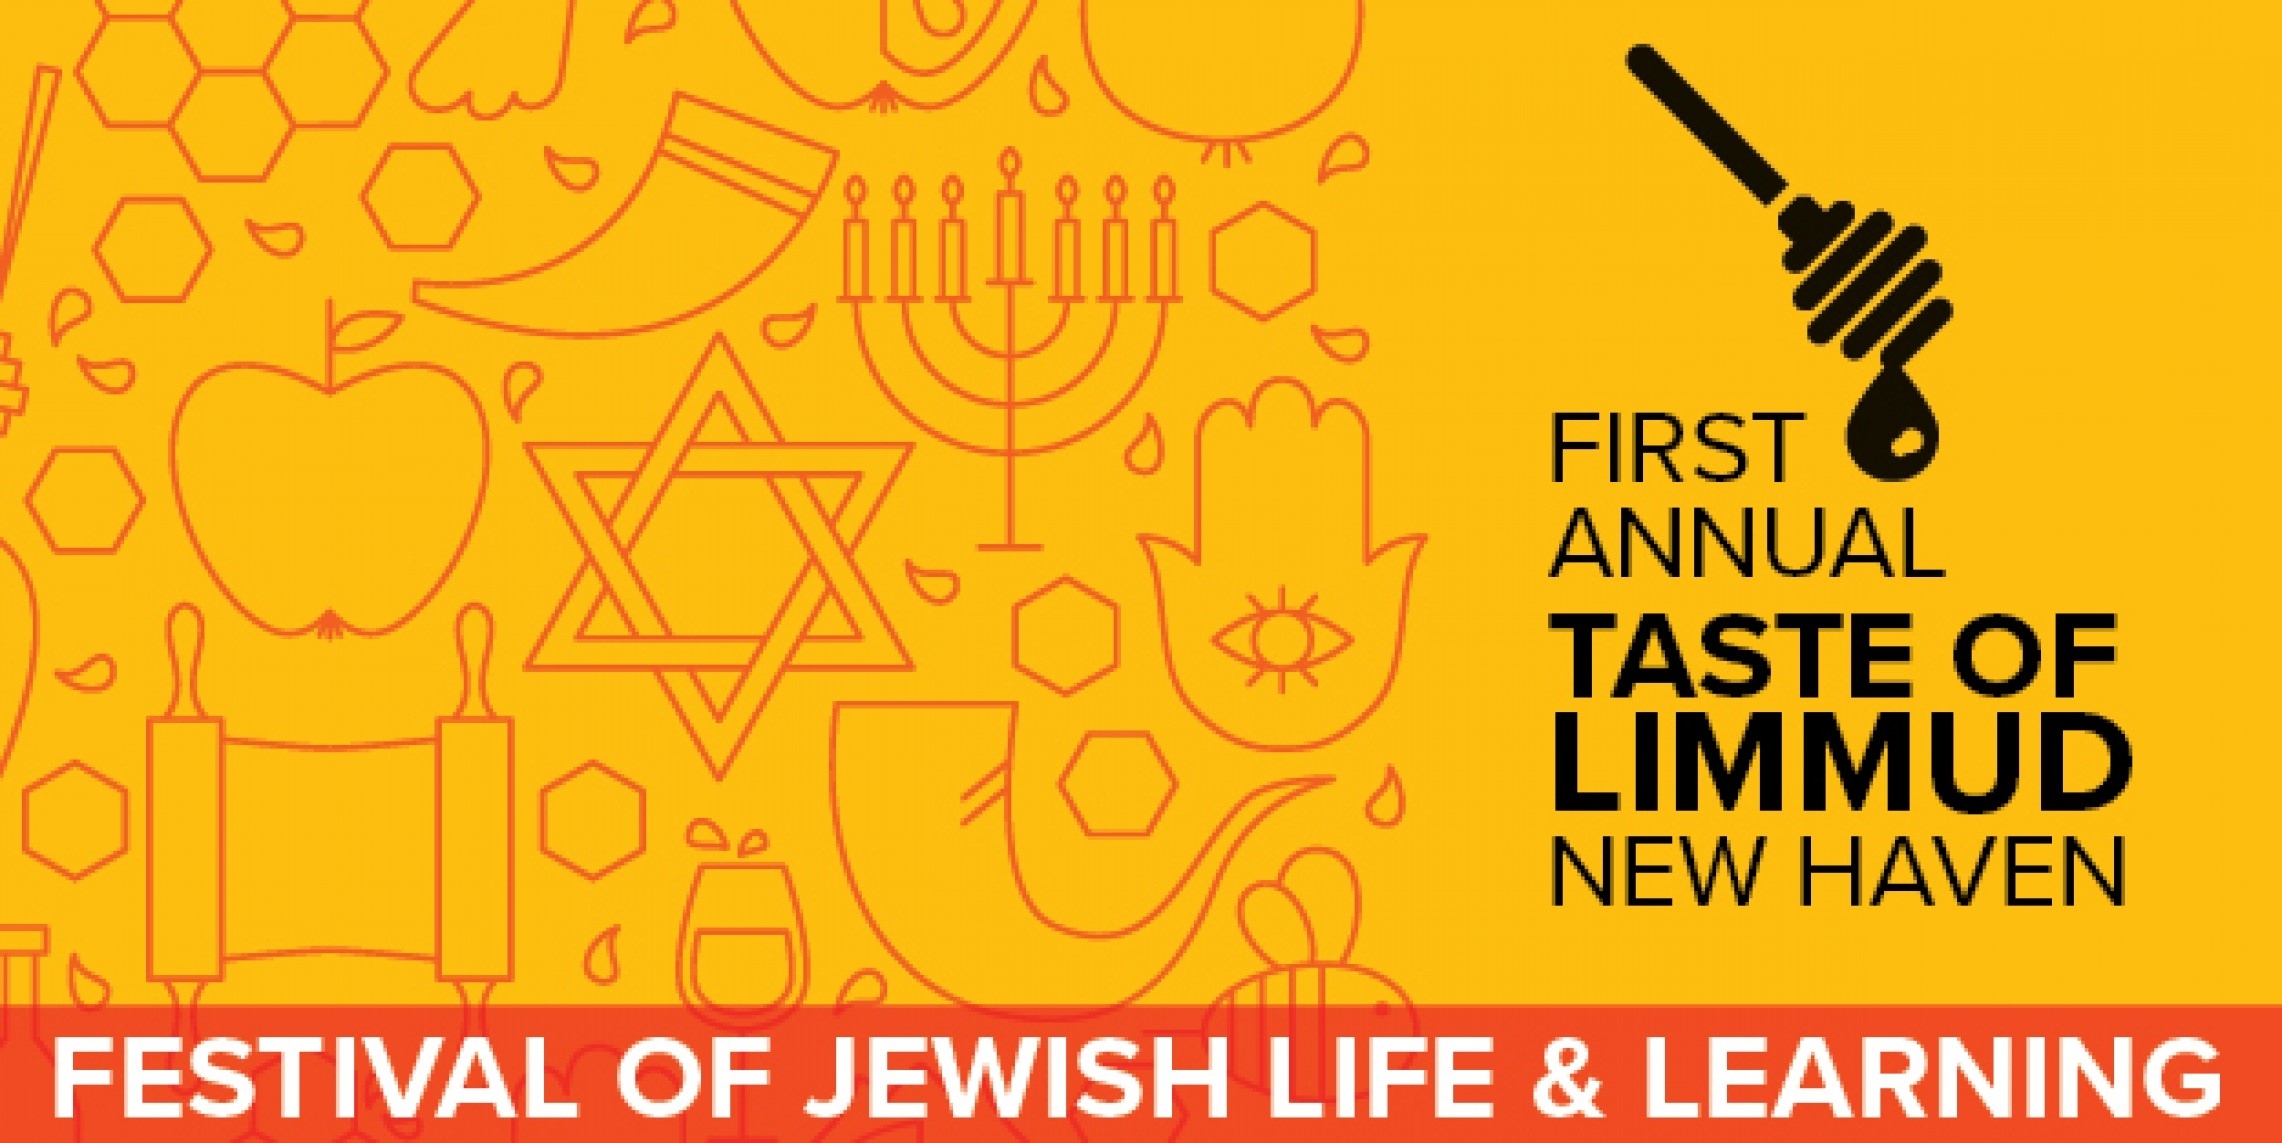 Rsvp | Jewish Federation Of Greater New Haven Exceptional When The Jewish Federation Of Chicago Will Be Close For Holidays In 2020